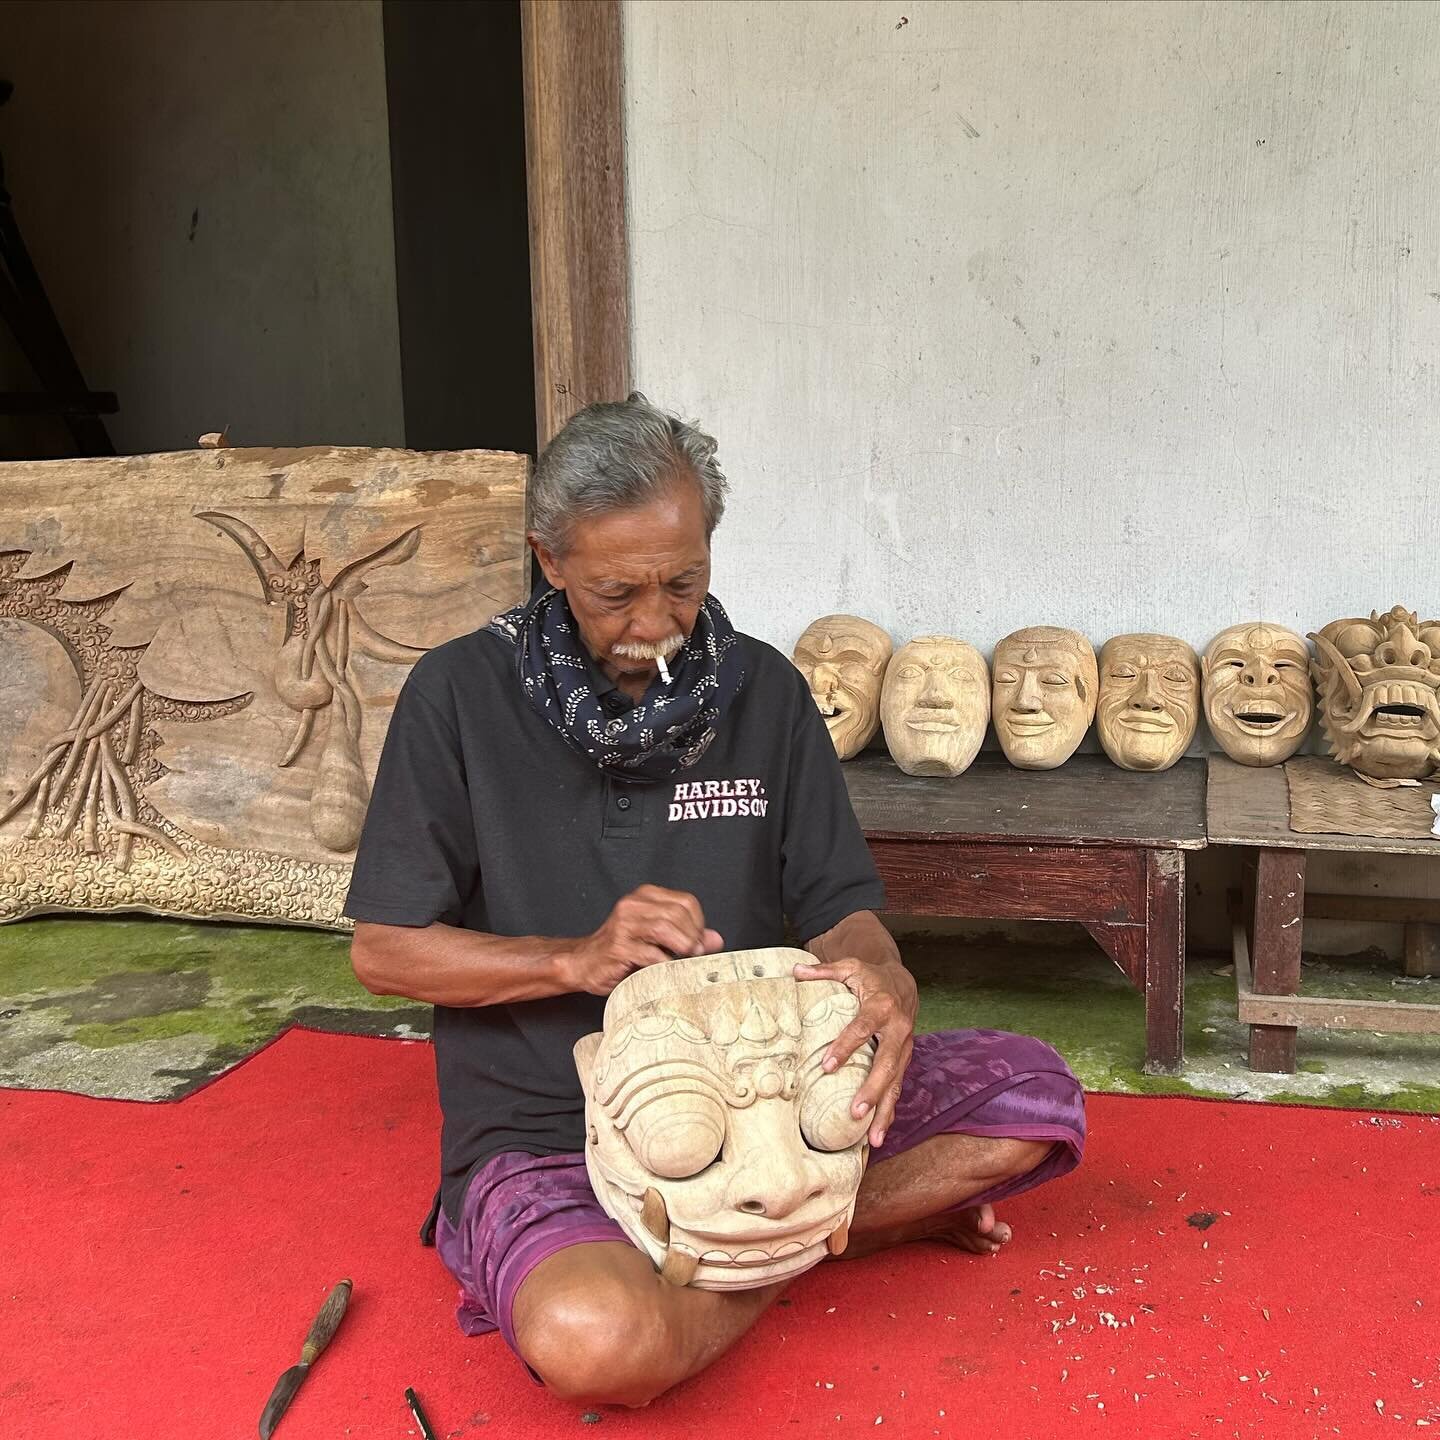 I got to visit and sit with a wood carving artist on my last day in Bali. In my past life my wheels would have been turning with ideas on how to utilize his traditional techniques to create my own designs. This time though I just sat, watched, asked 